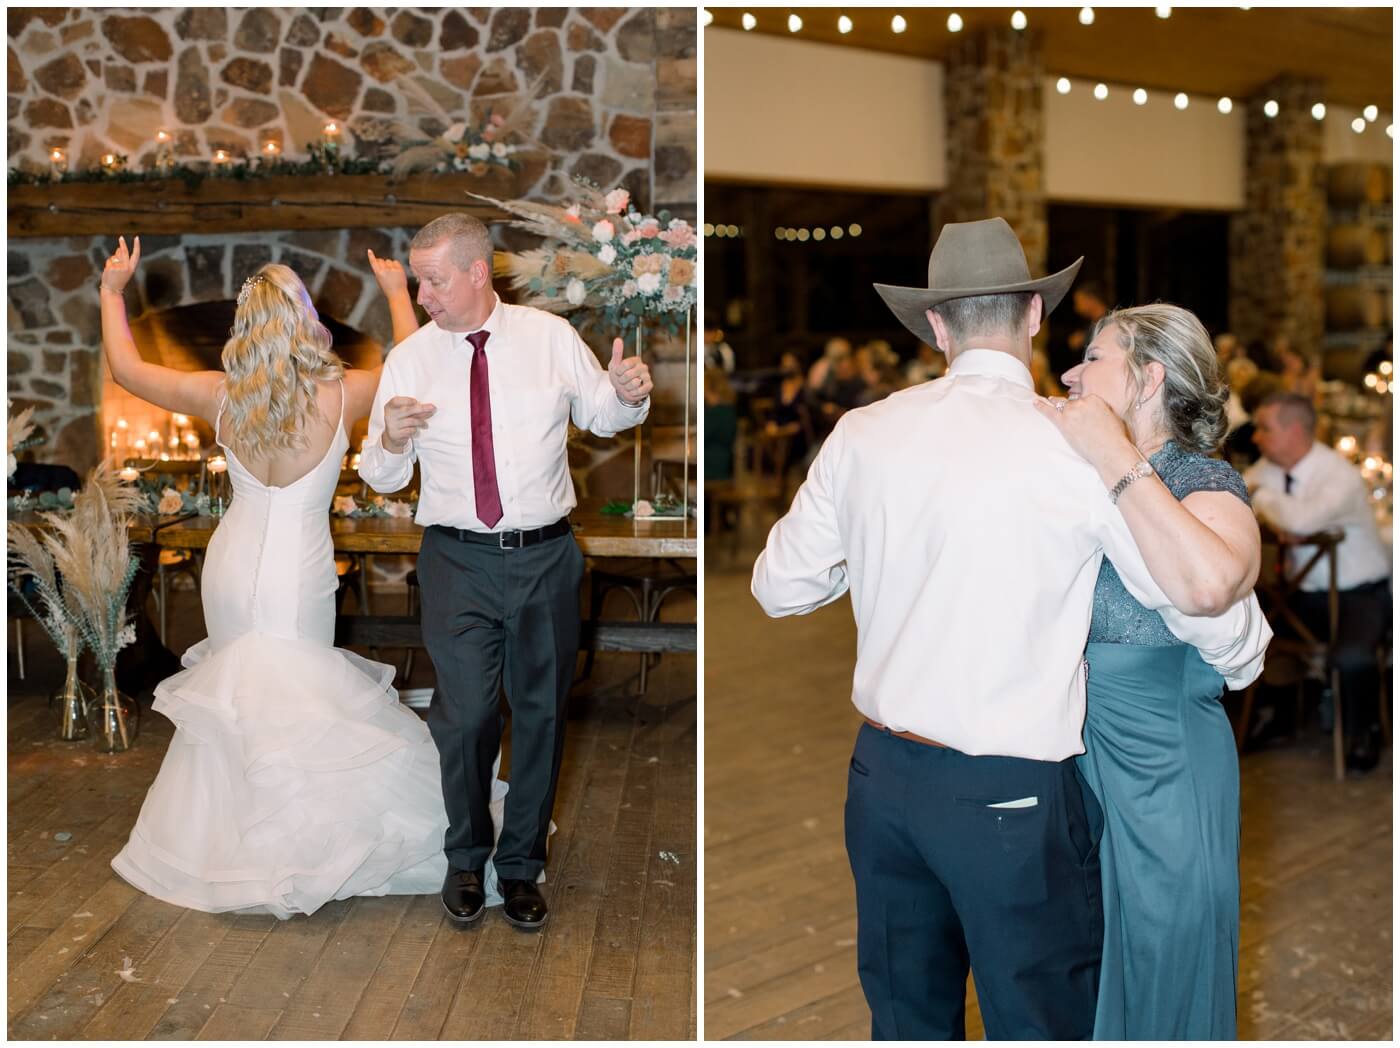 Houston Wedding at The Vine | mother son dance and father daughter dance 